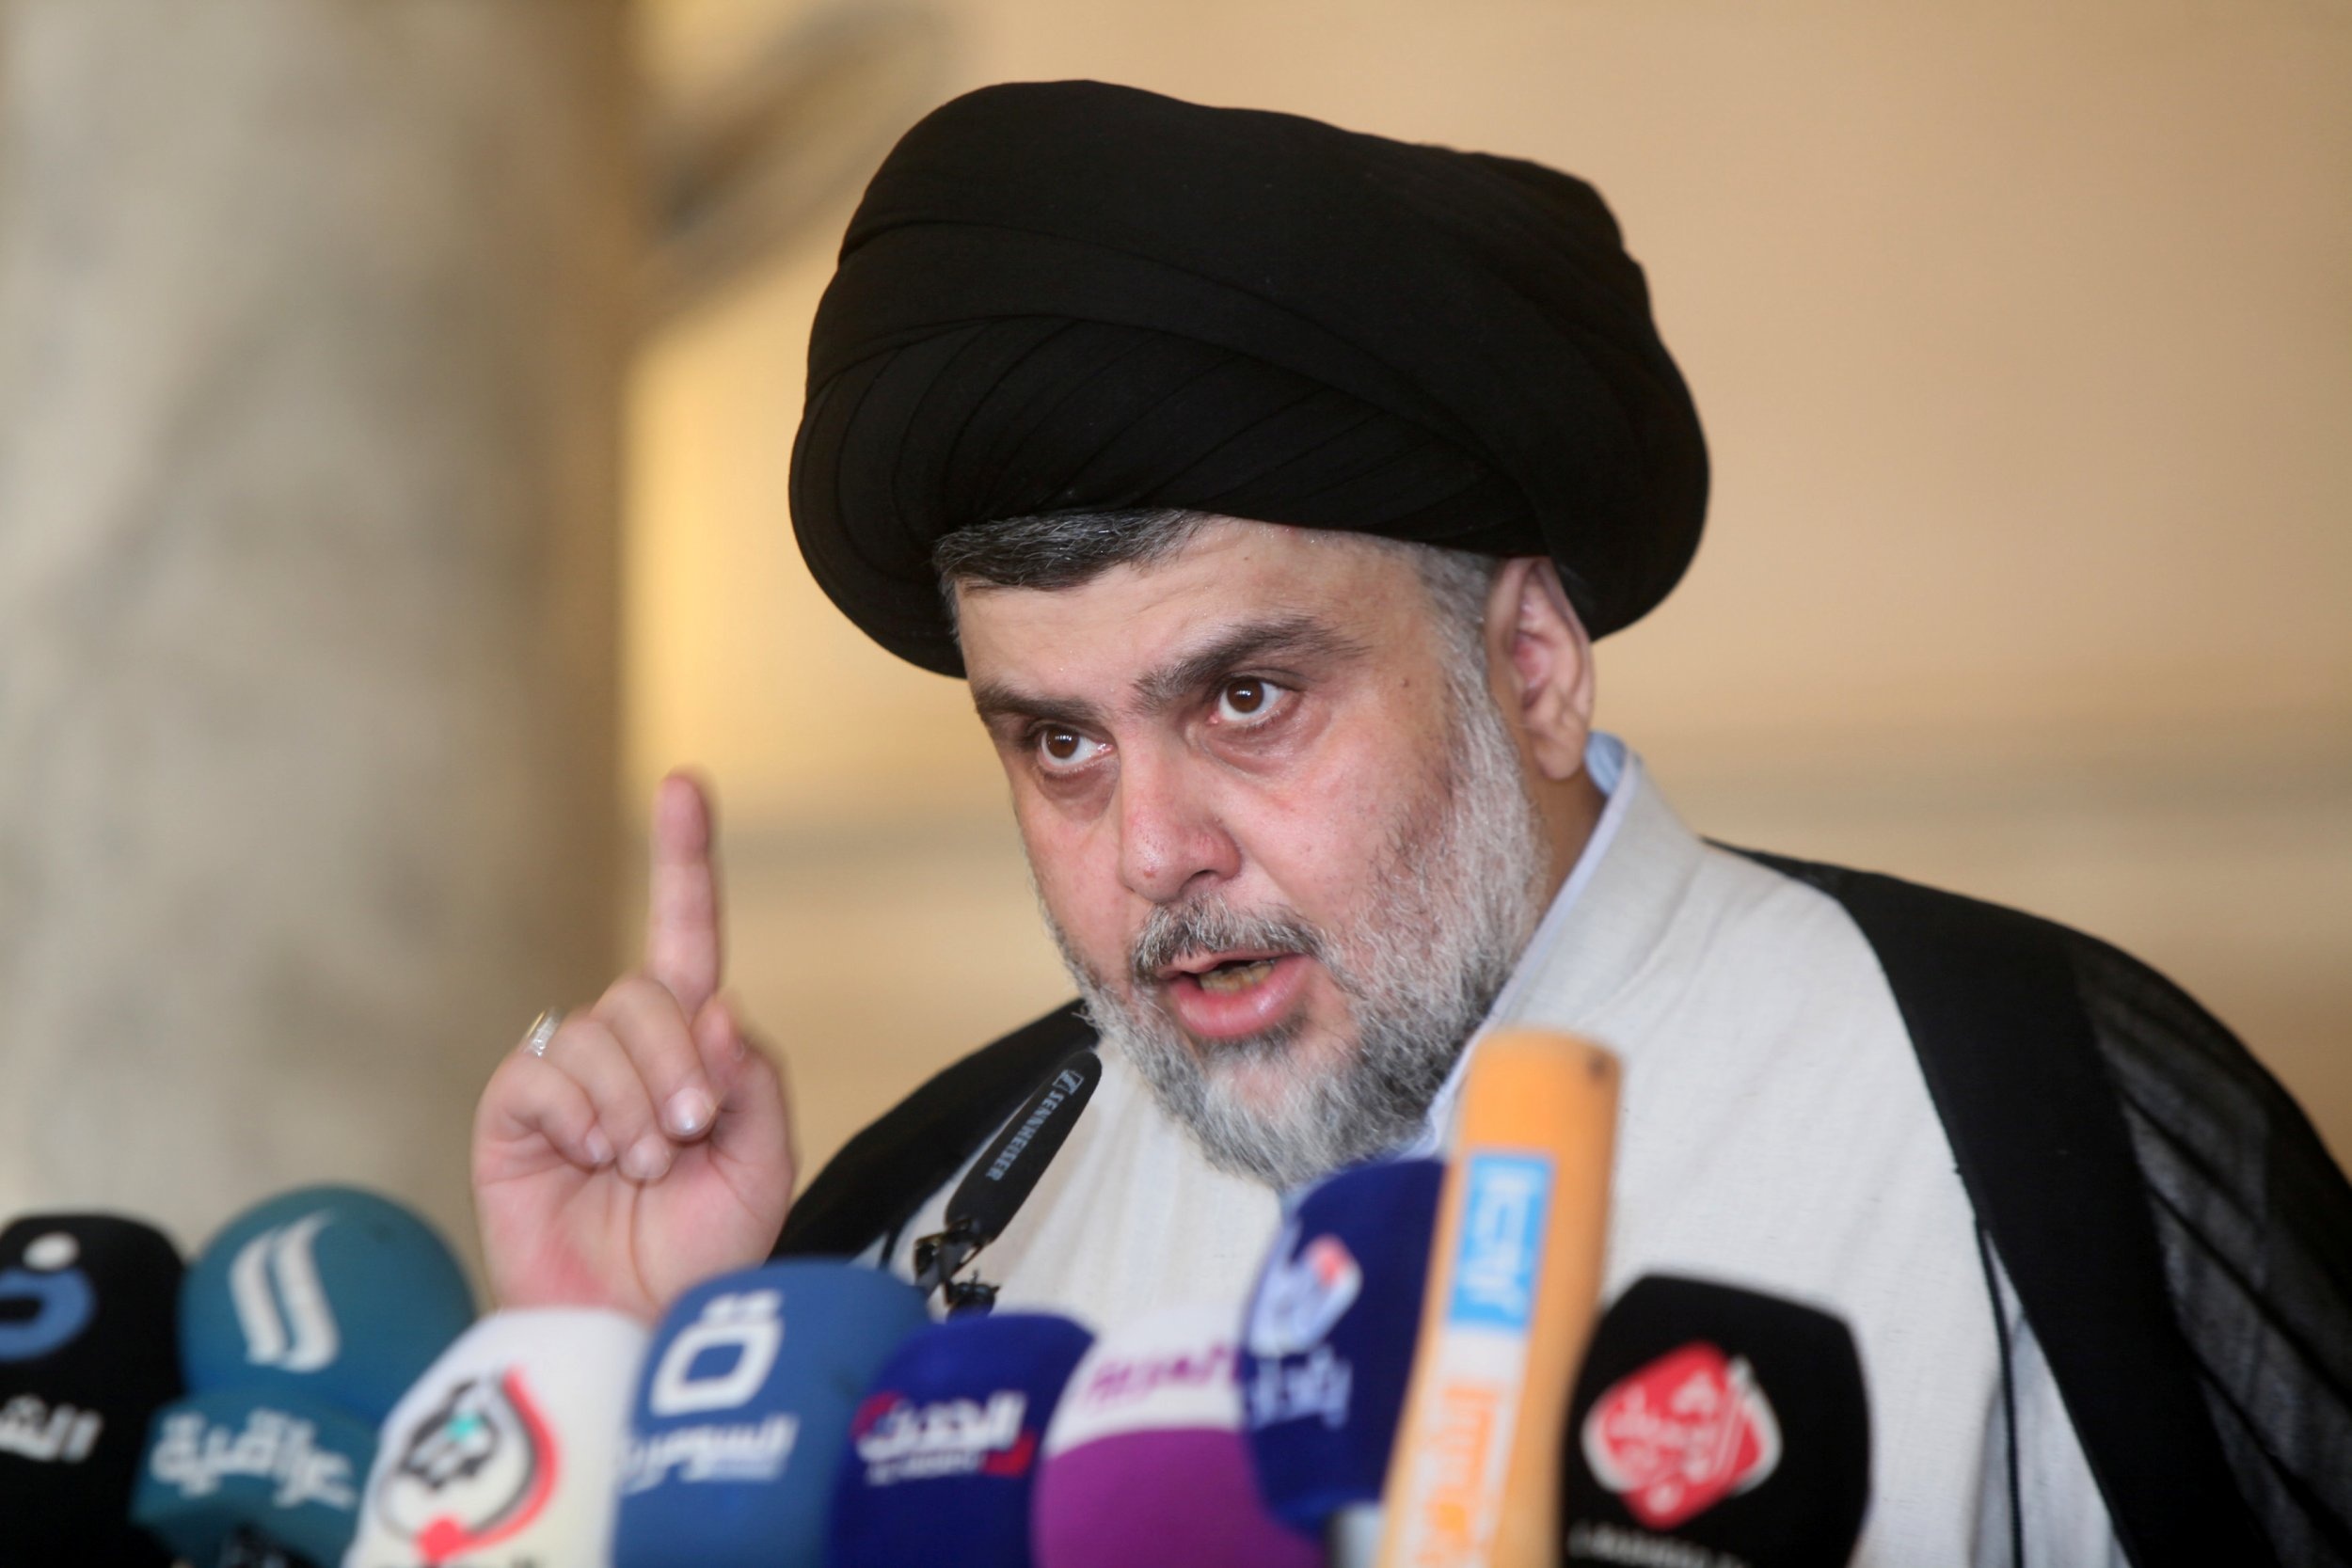 Muqtada Sadr threatens to end parliament if MPs don’t attend Saturday session